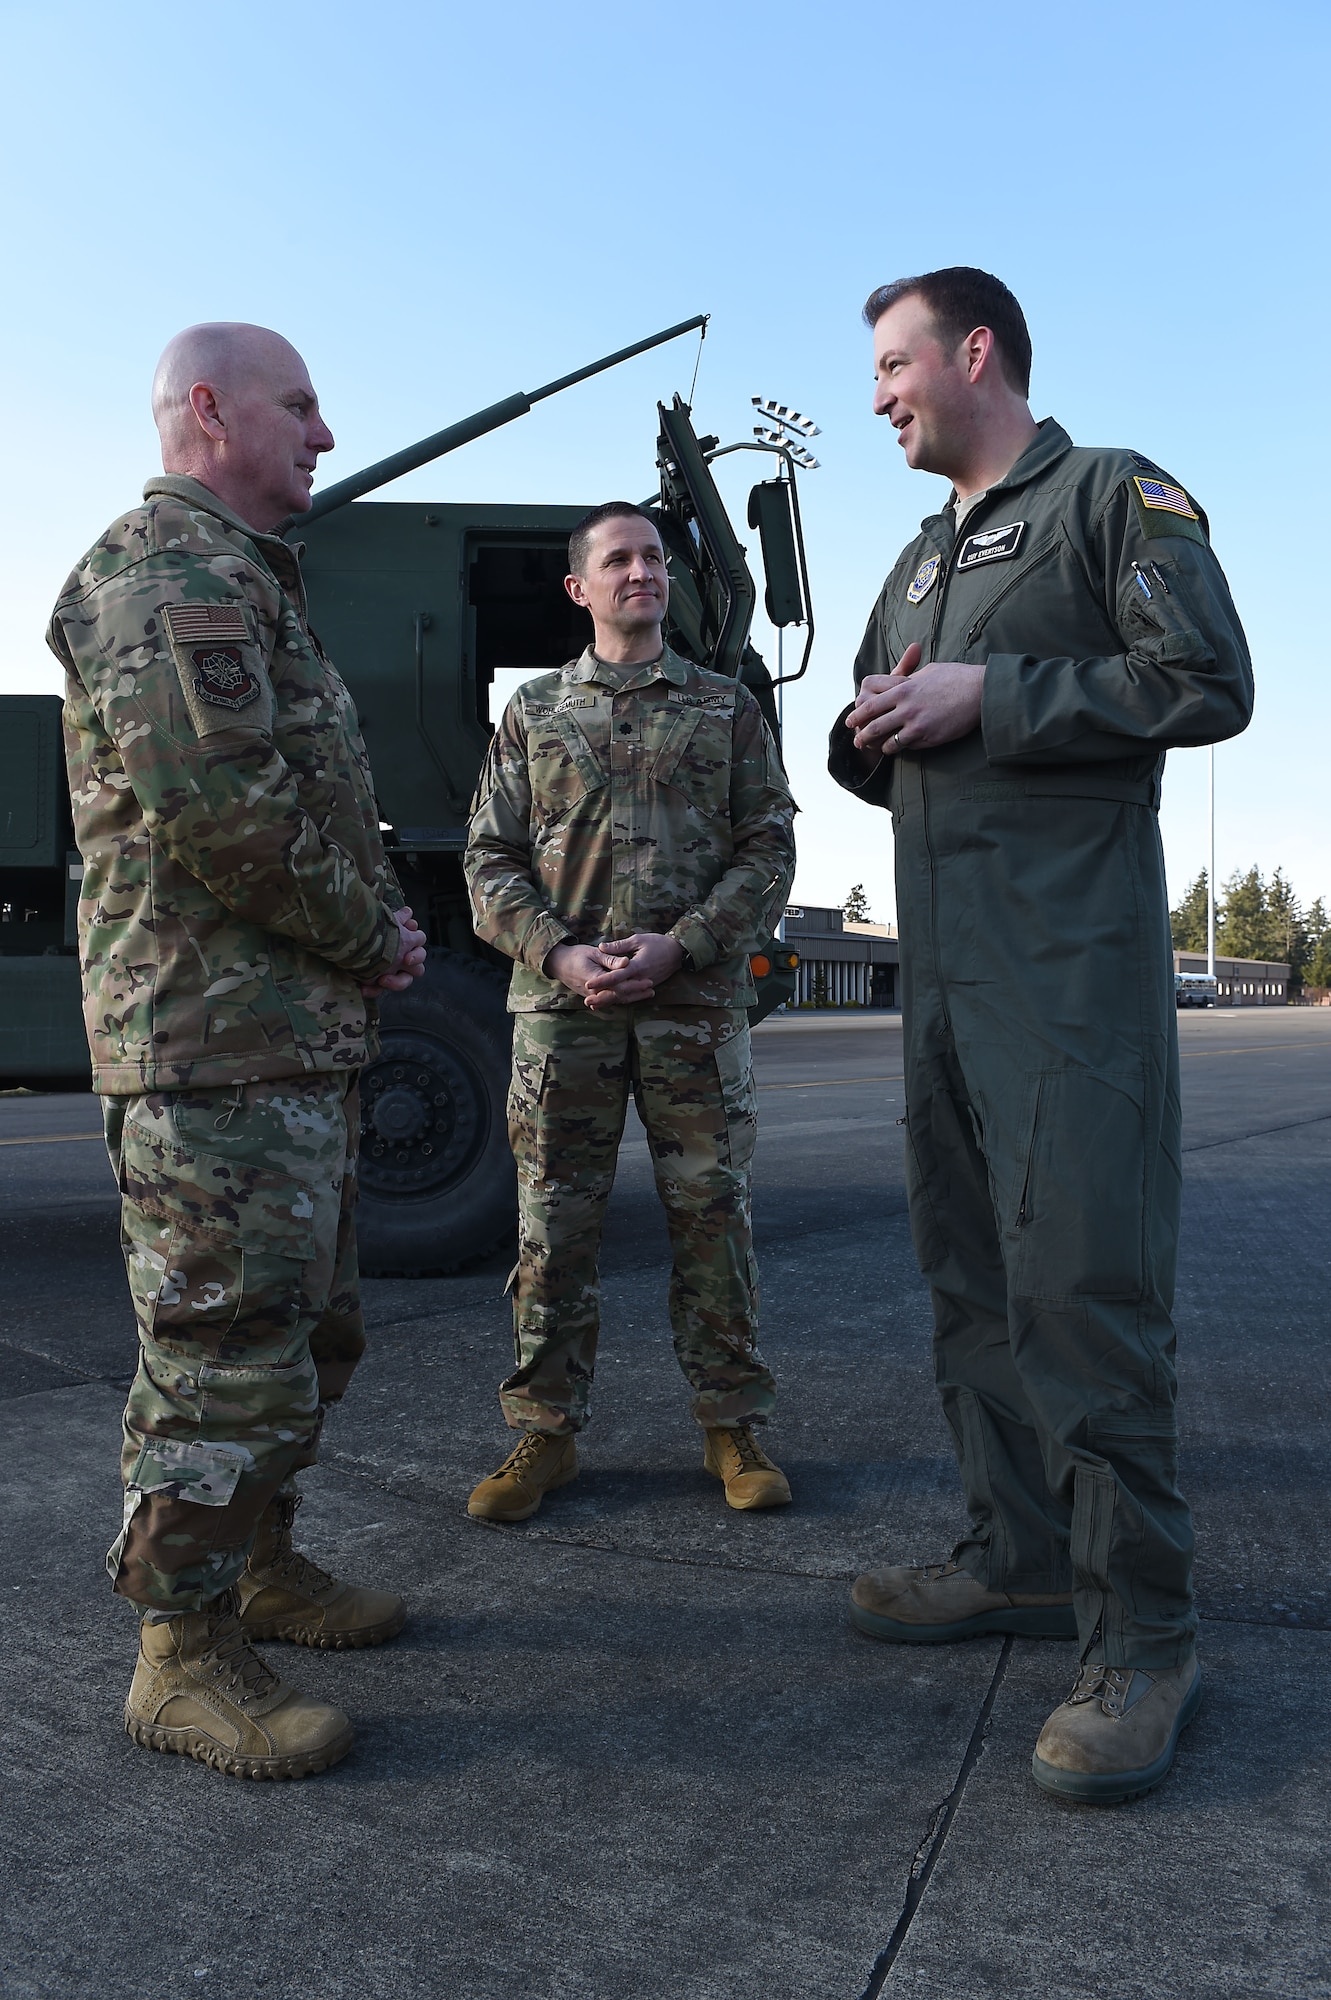 Maj. Gen. Sam C. Barrett, 18th Air Force commander, U.S. Army Lt. Col. Marty Wohlgemuth, 5-3 Field Artillery Battalion commander, listen while Capt. Guy Evertson, 8th Airlift Squadron pilot, shares the applicability of joint-basing to real-world skills development on Joint Base Lewis-McChord, Wash., Feb. 21, 2019.